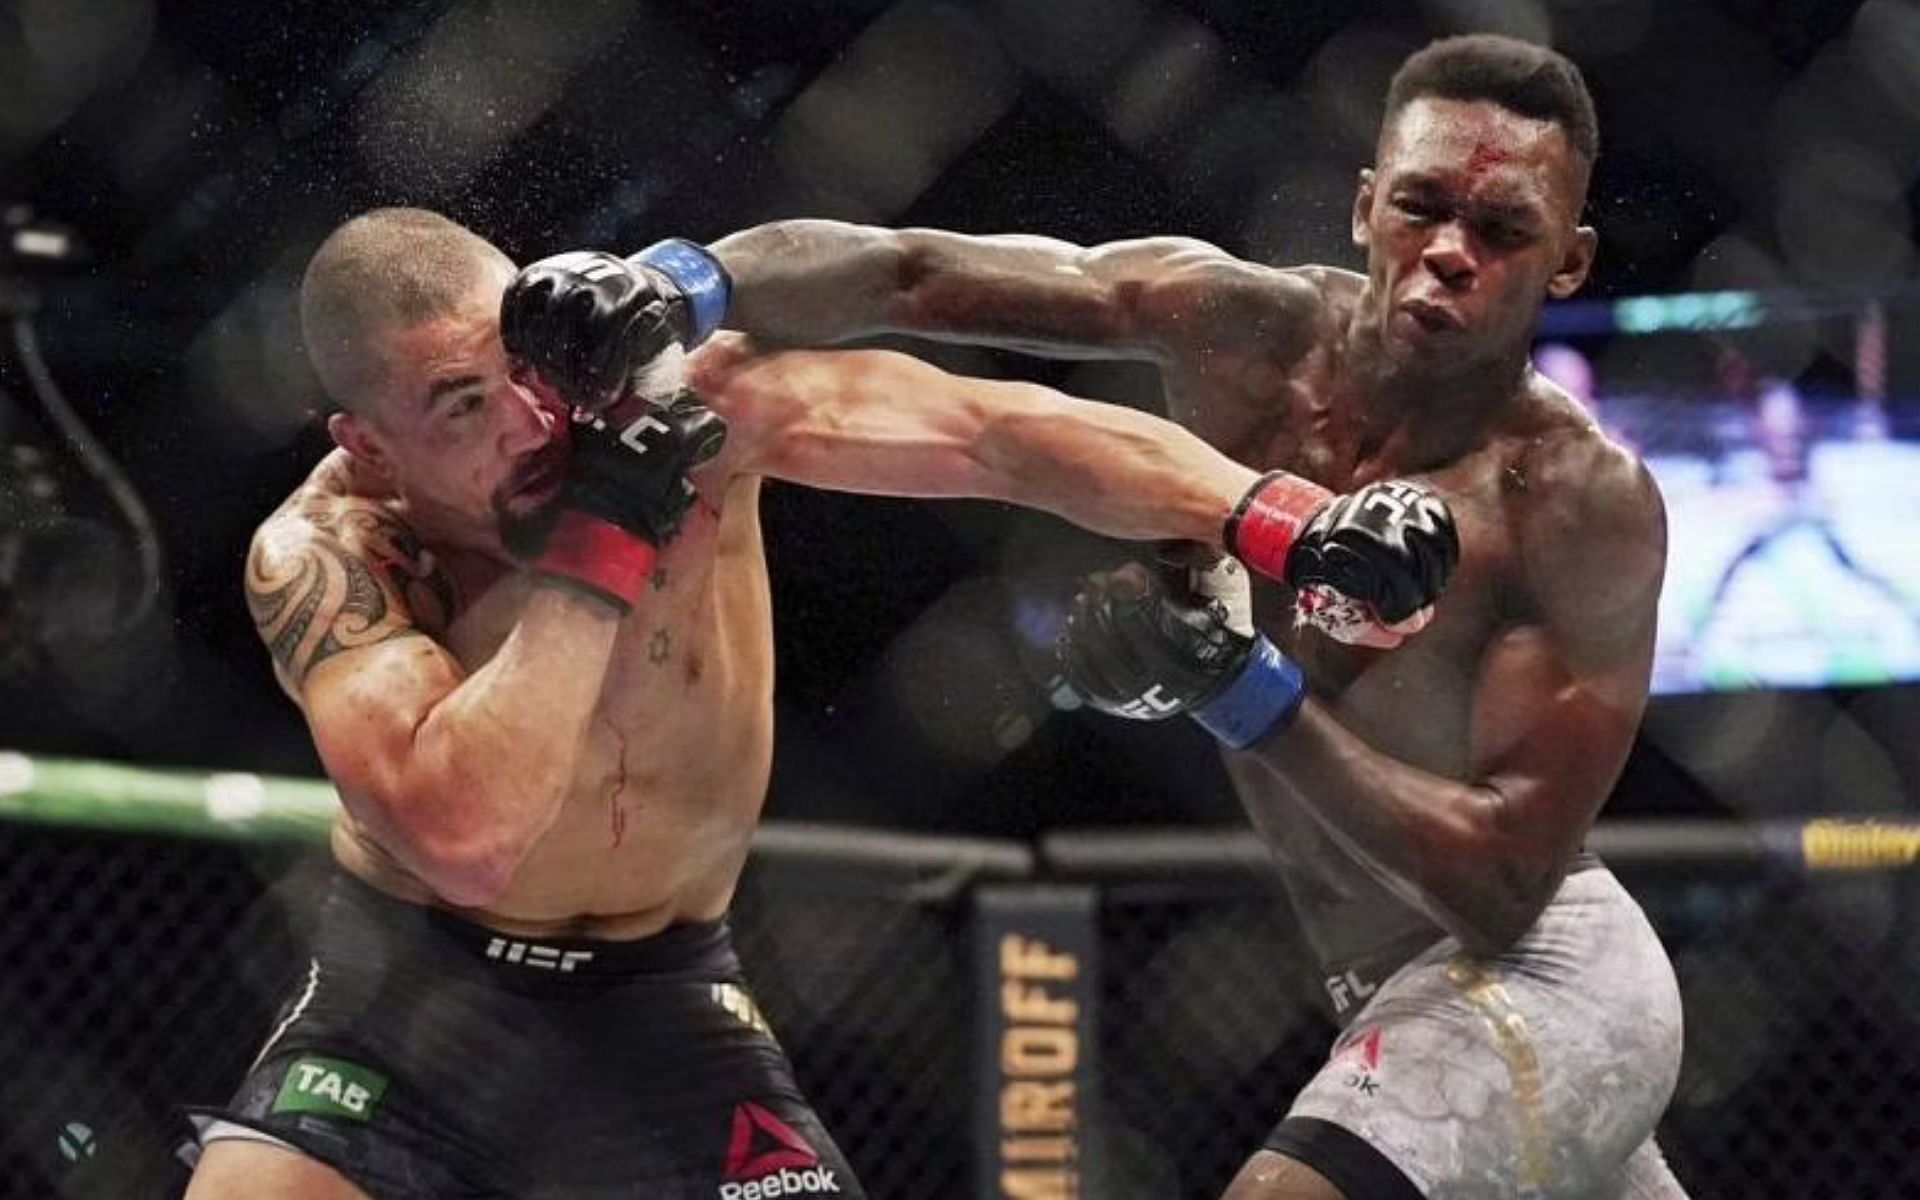 Israel Adesanya and Robert Whittaker squared off at UFC 243 back in 2019